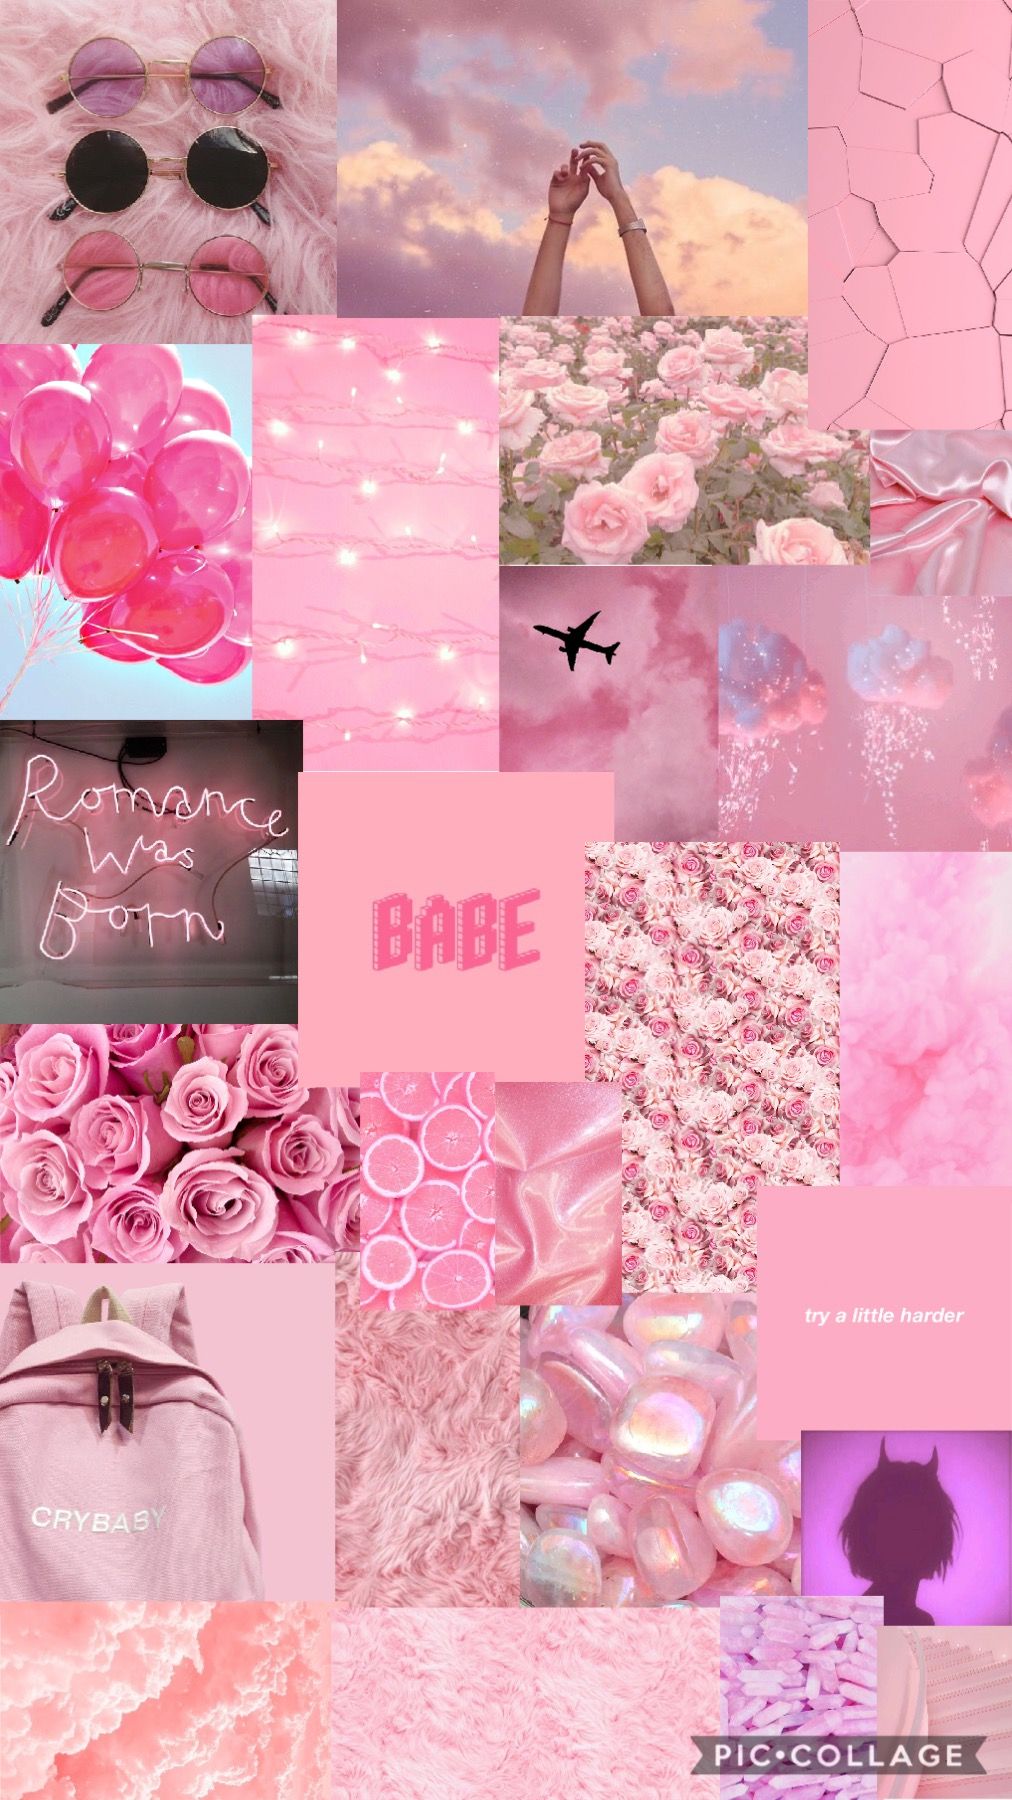 Aesthetic Girly Wallpapers